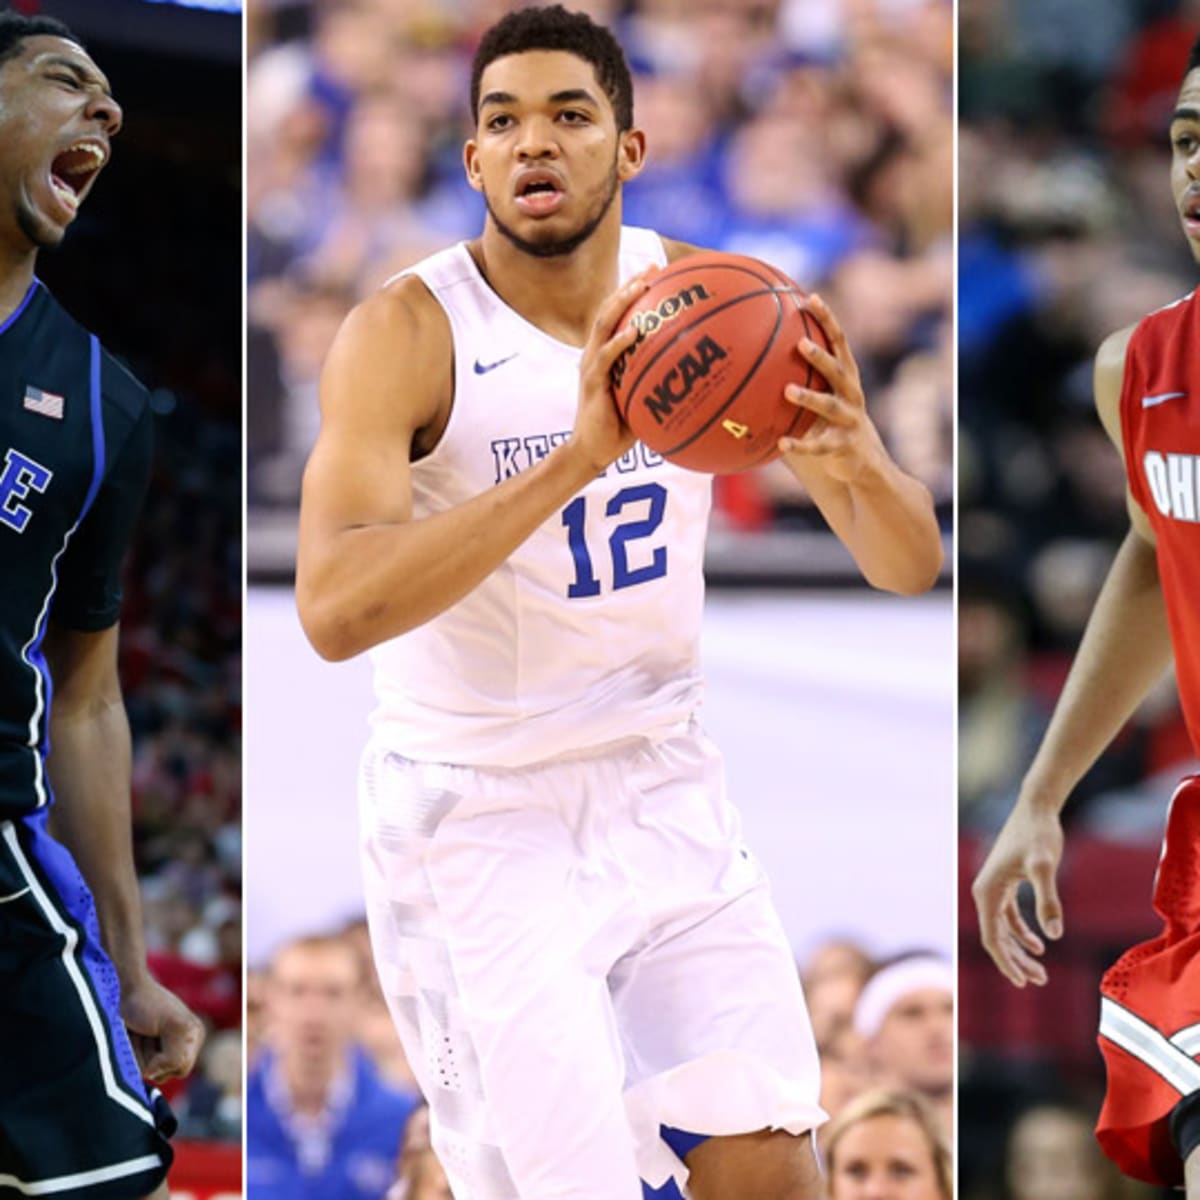 NBA Mock Draft: Lakers take Okafor No. 2 — or do they trade for DeMarcus  Cousins? – Daily News